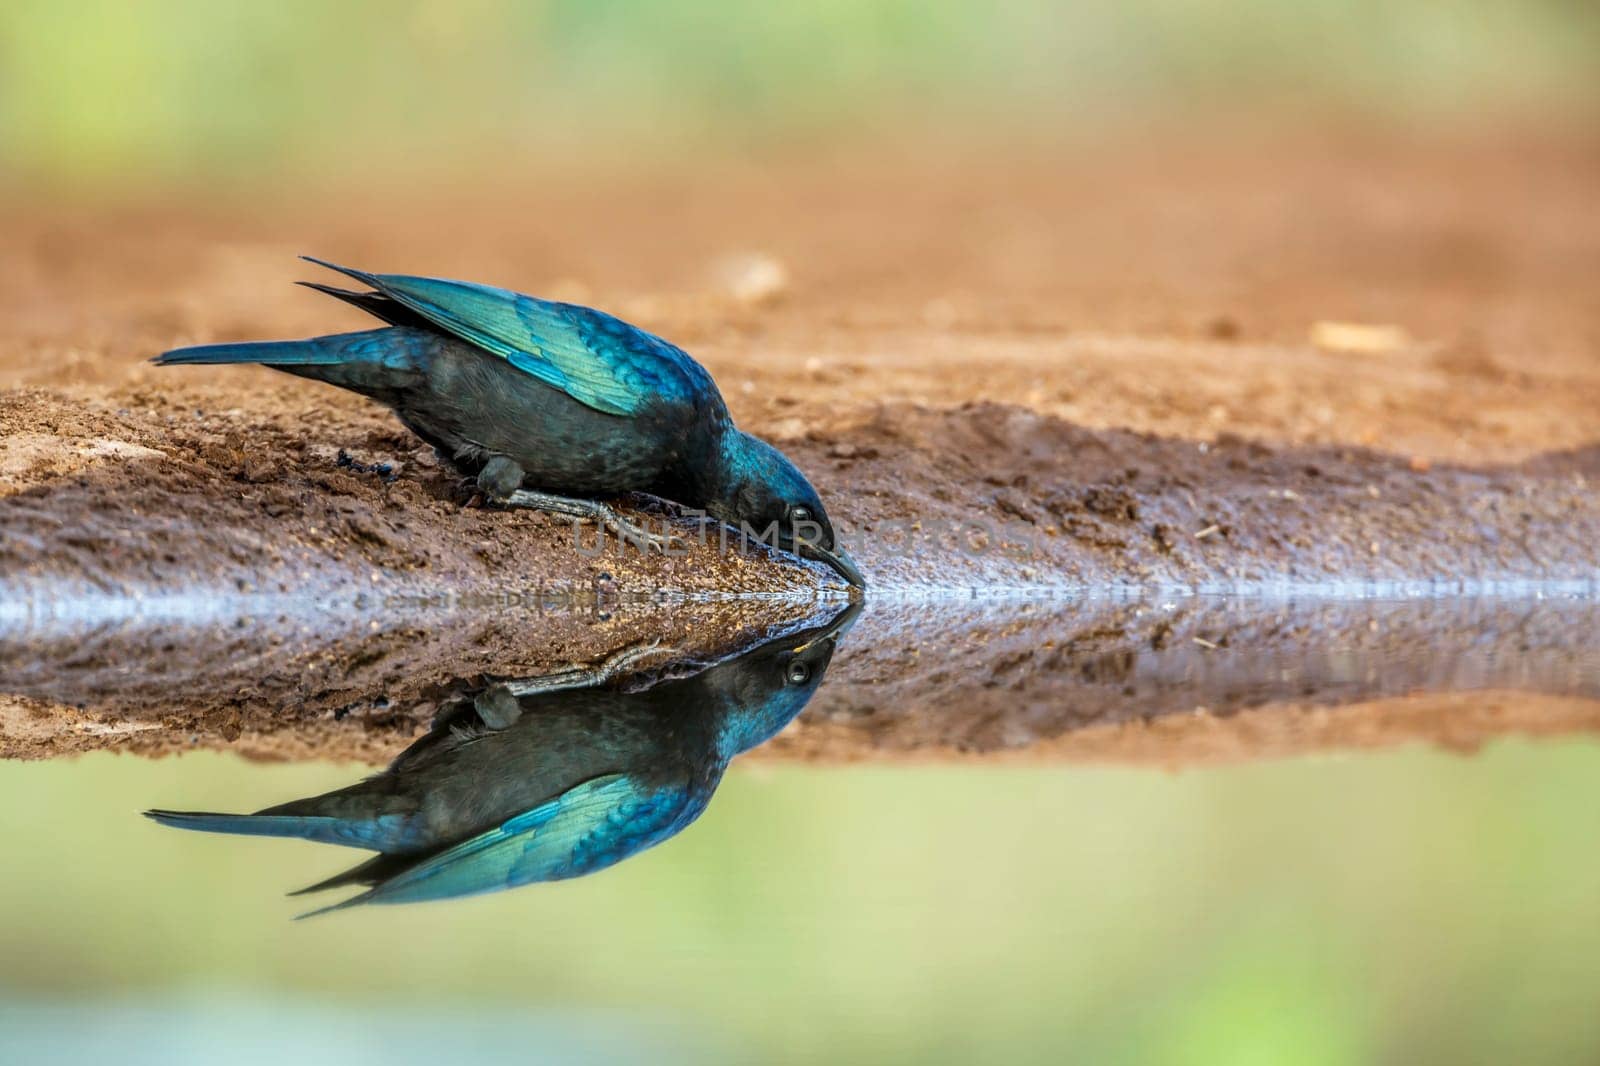 Cape Glossy Starling drinking at waterhole with reflection in Kruger National park, South Africa ; Specie Lamprotornis nitens family of Sturnidae